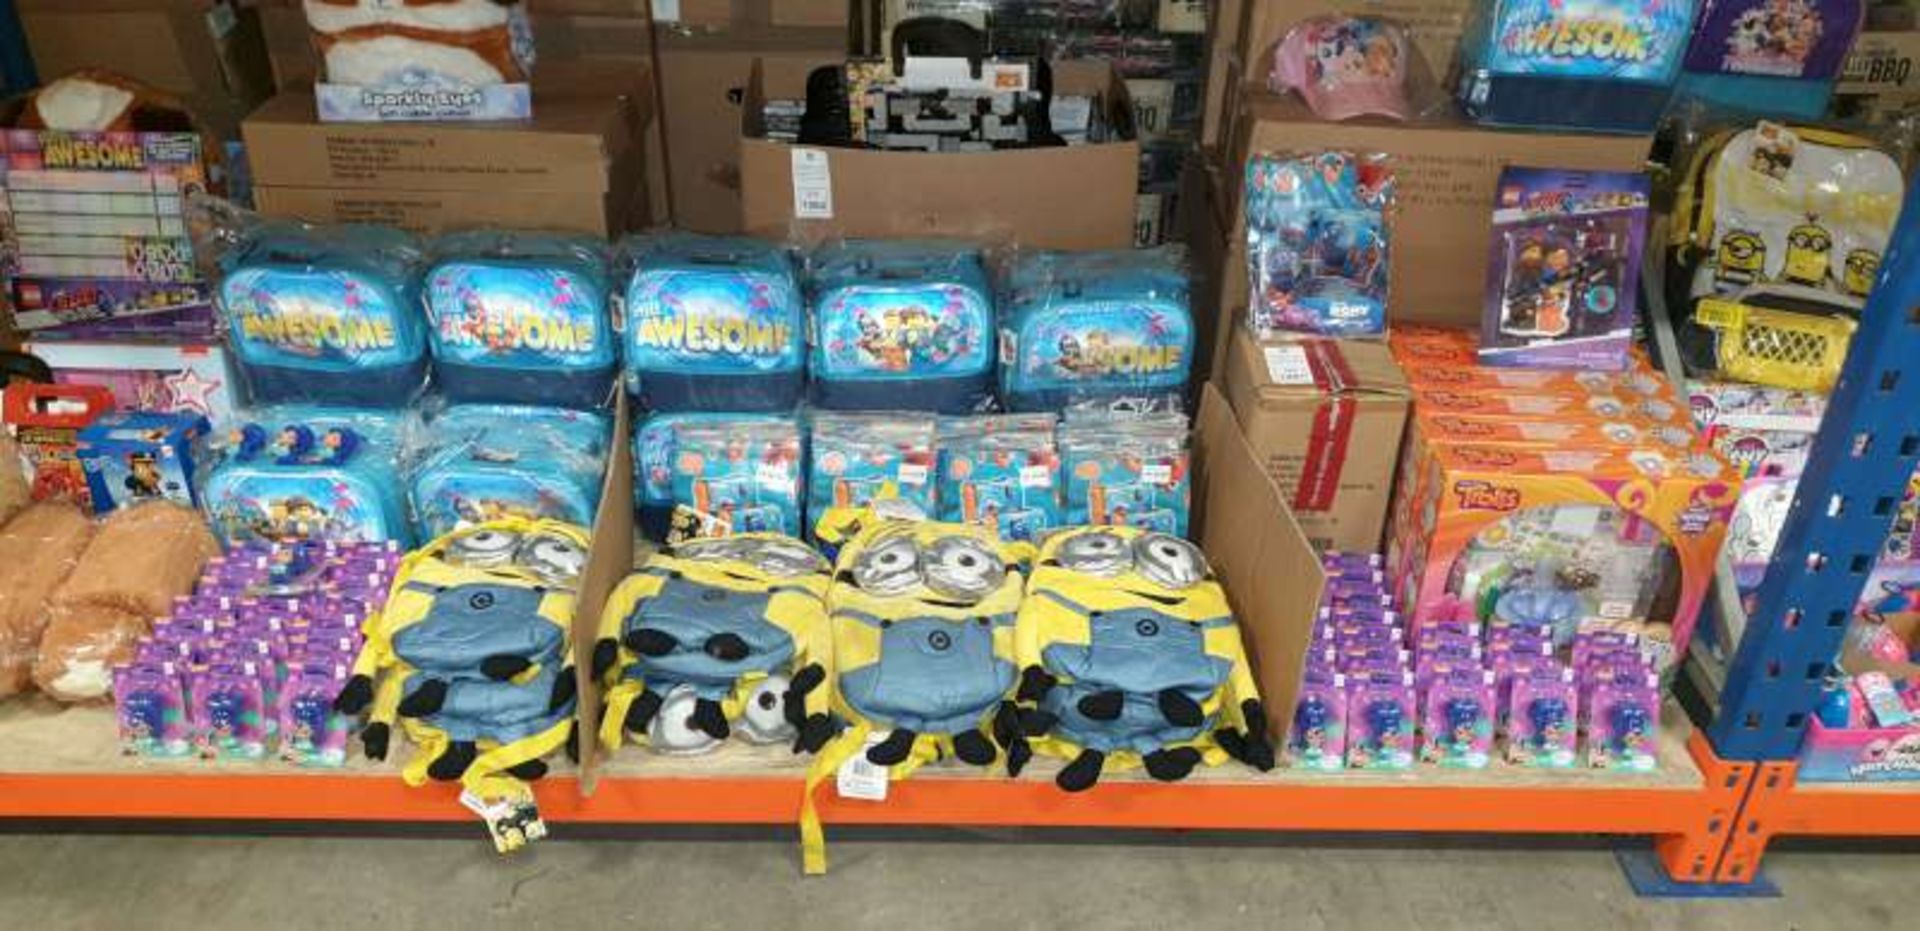 LOT CONTAINING MINIONS BACKPACKS, LEGO LUNCH BAGS, DORY ARMBANDS, DESPICABLE ME STICKER PLAY SCENE